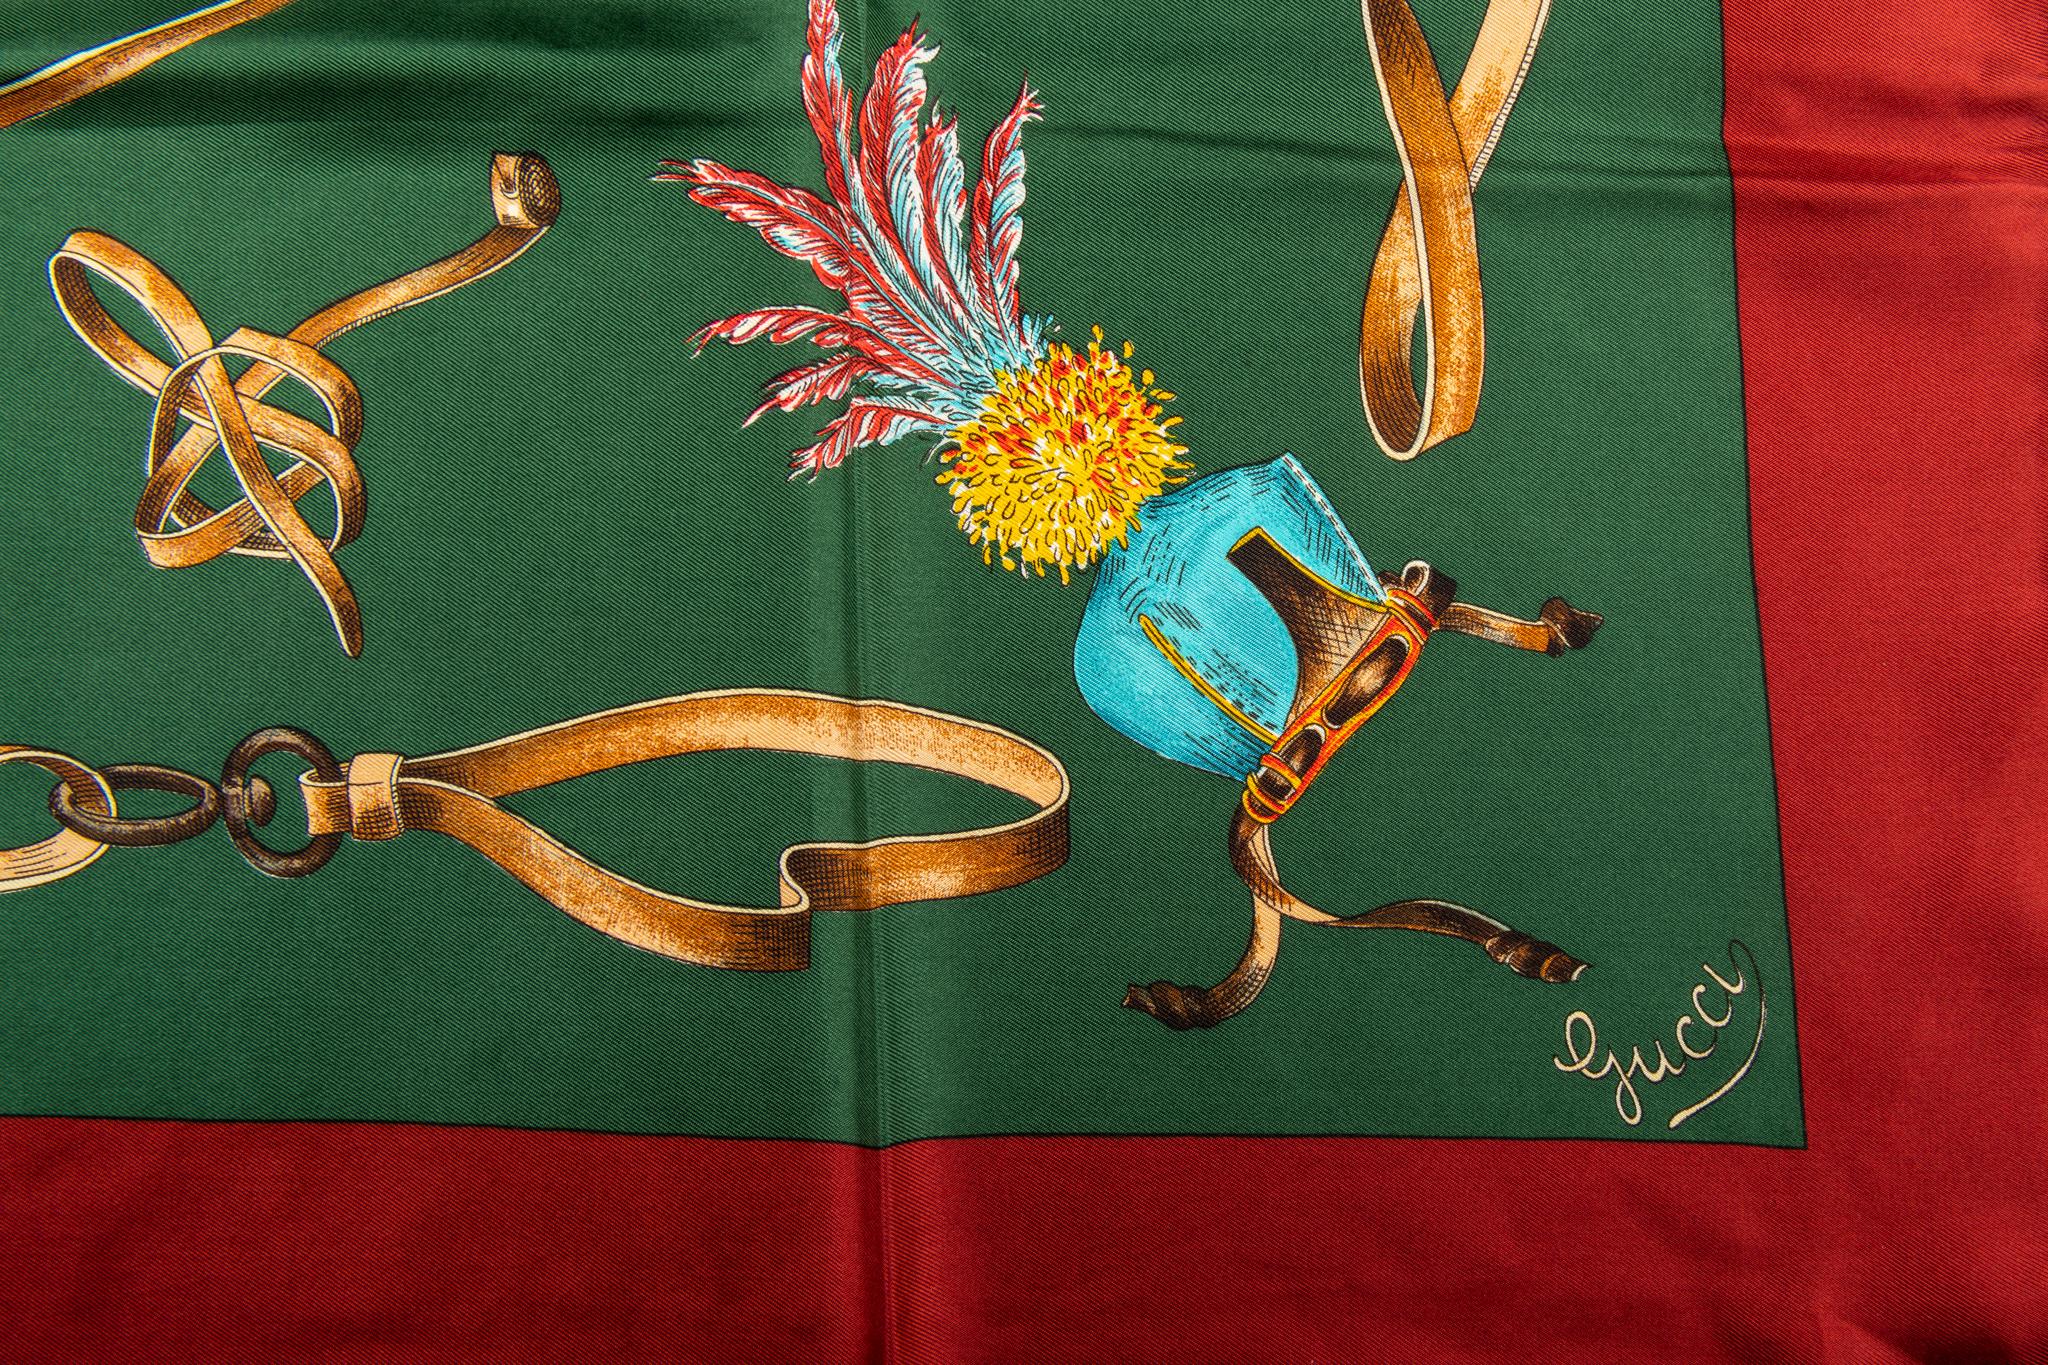 Gucci 100% silk scarf in green with red trim. Birds design. Hand rolled edges.
